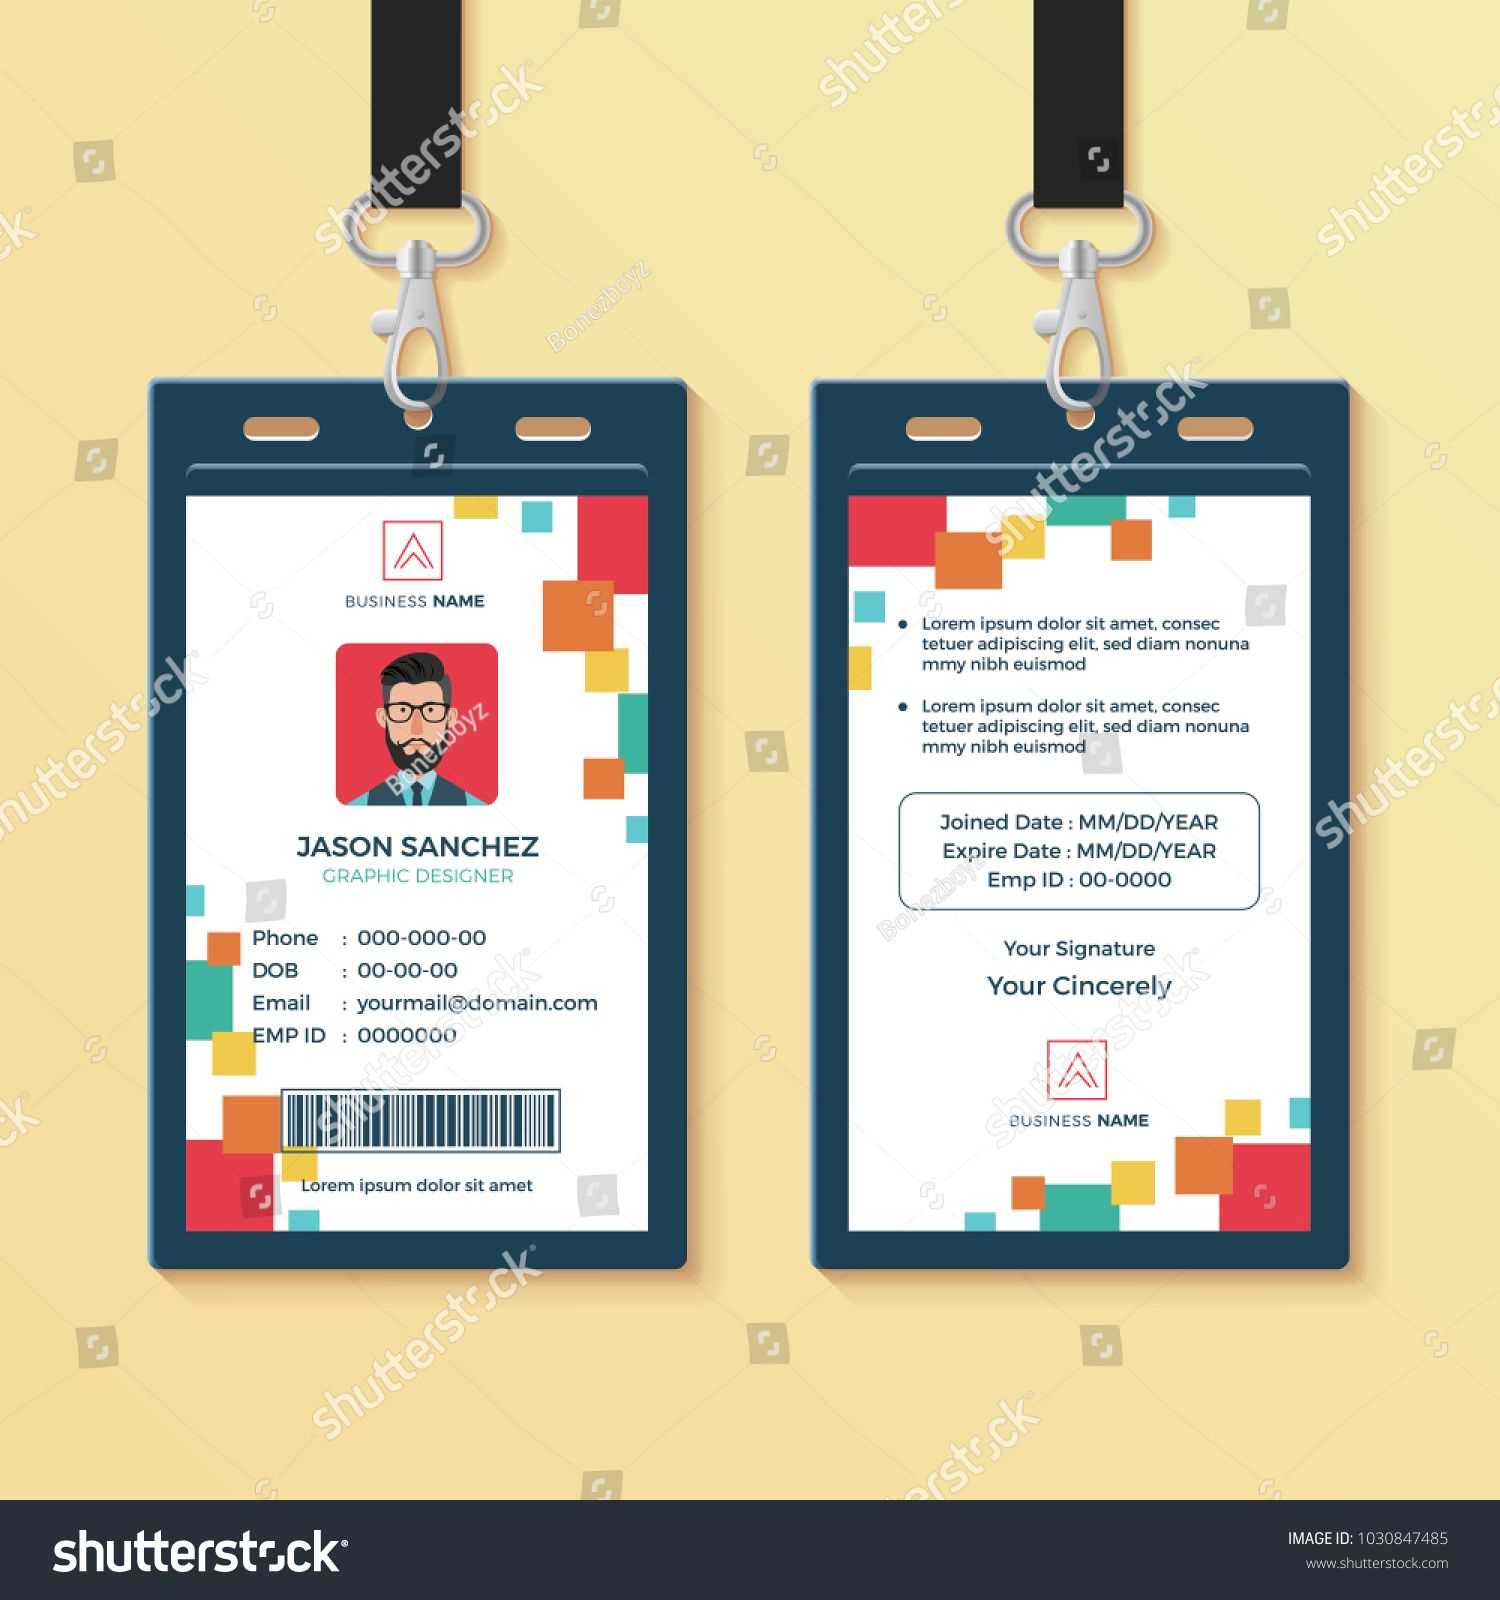 Creative Id Card Template, Perfect For Any Types Of Agency Throughout Media Id Card Templates